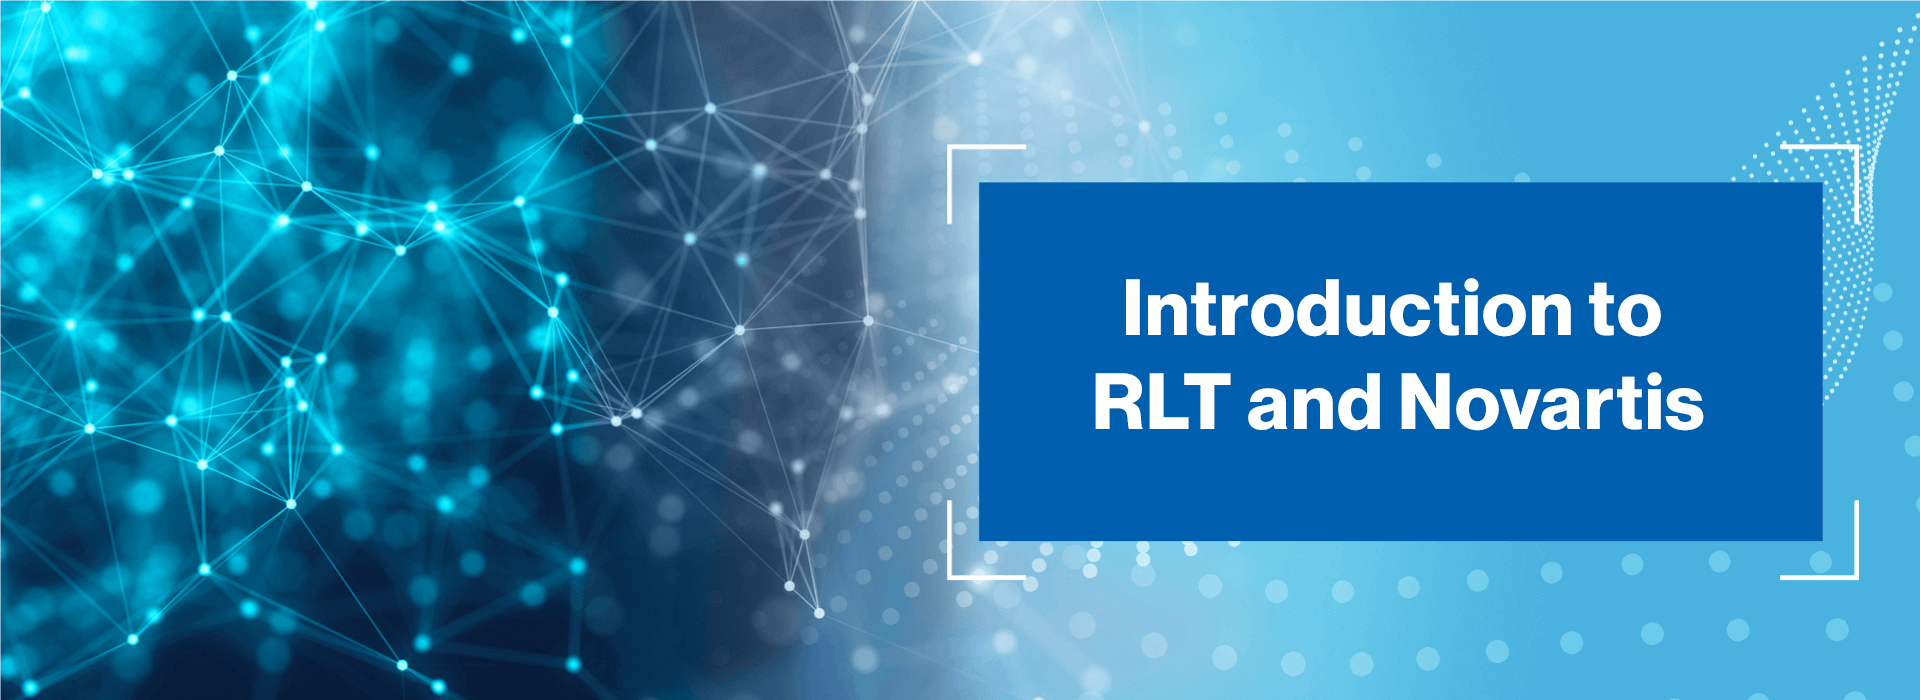 Introduction to RLT: Green and blue background with a complex molecular structure